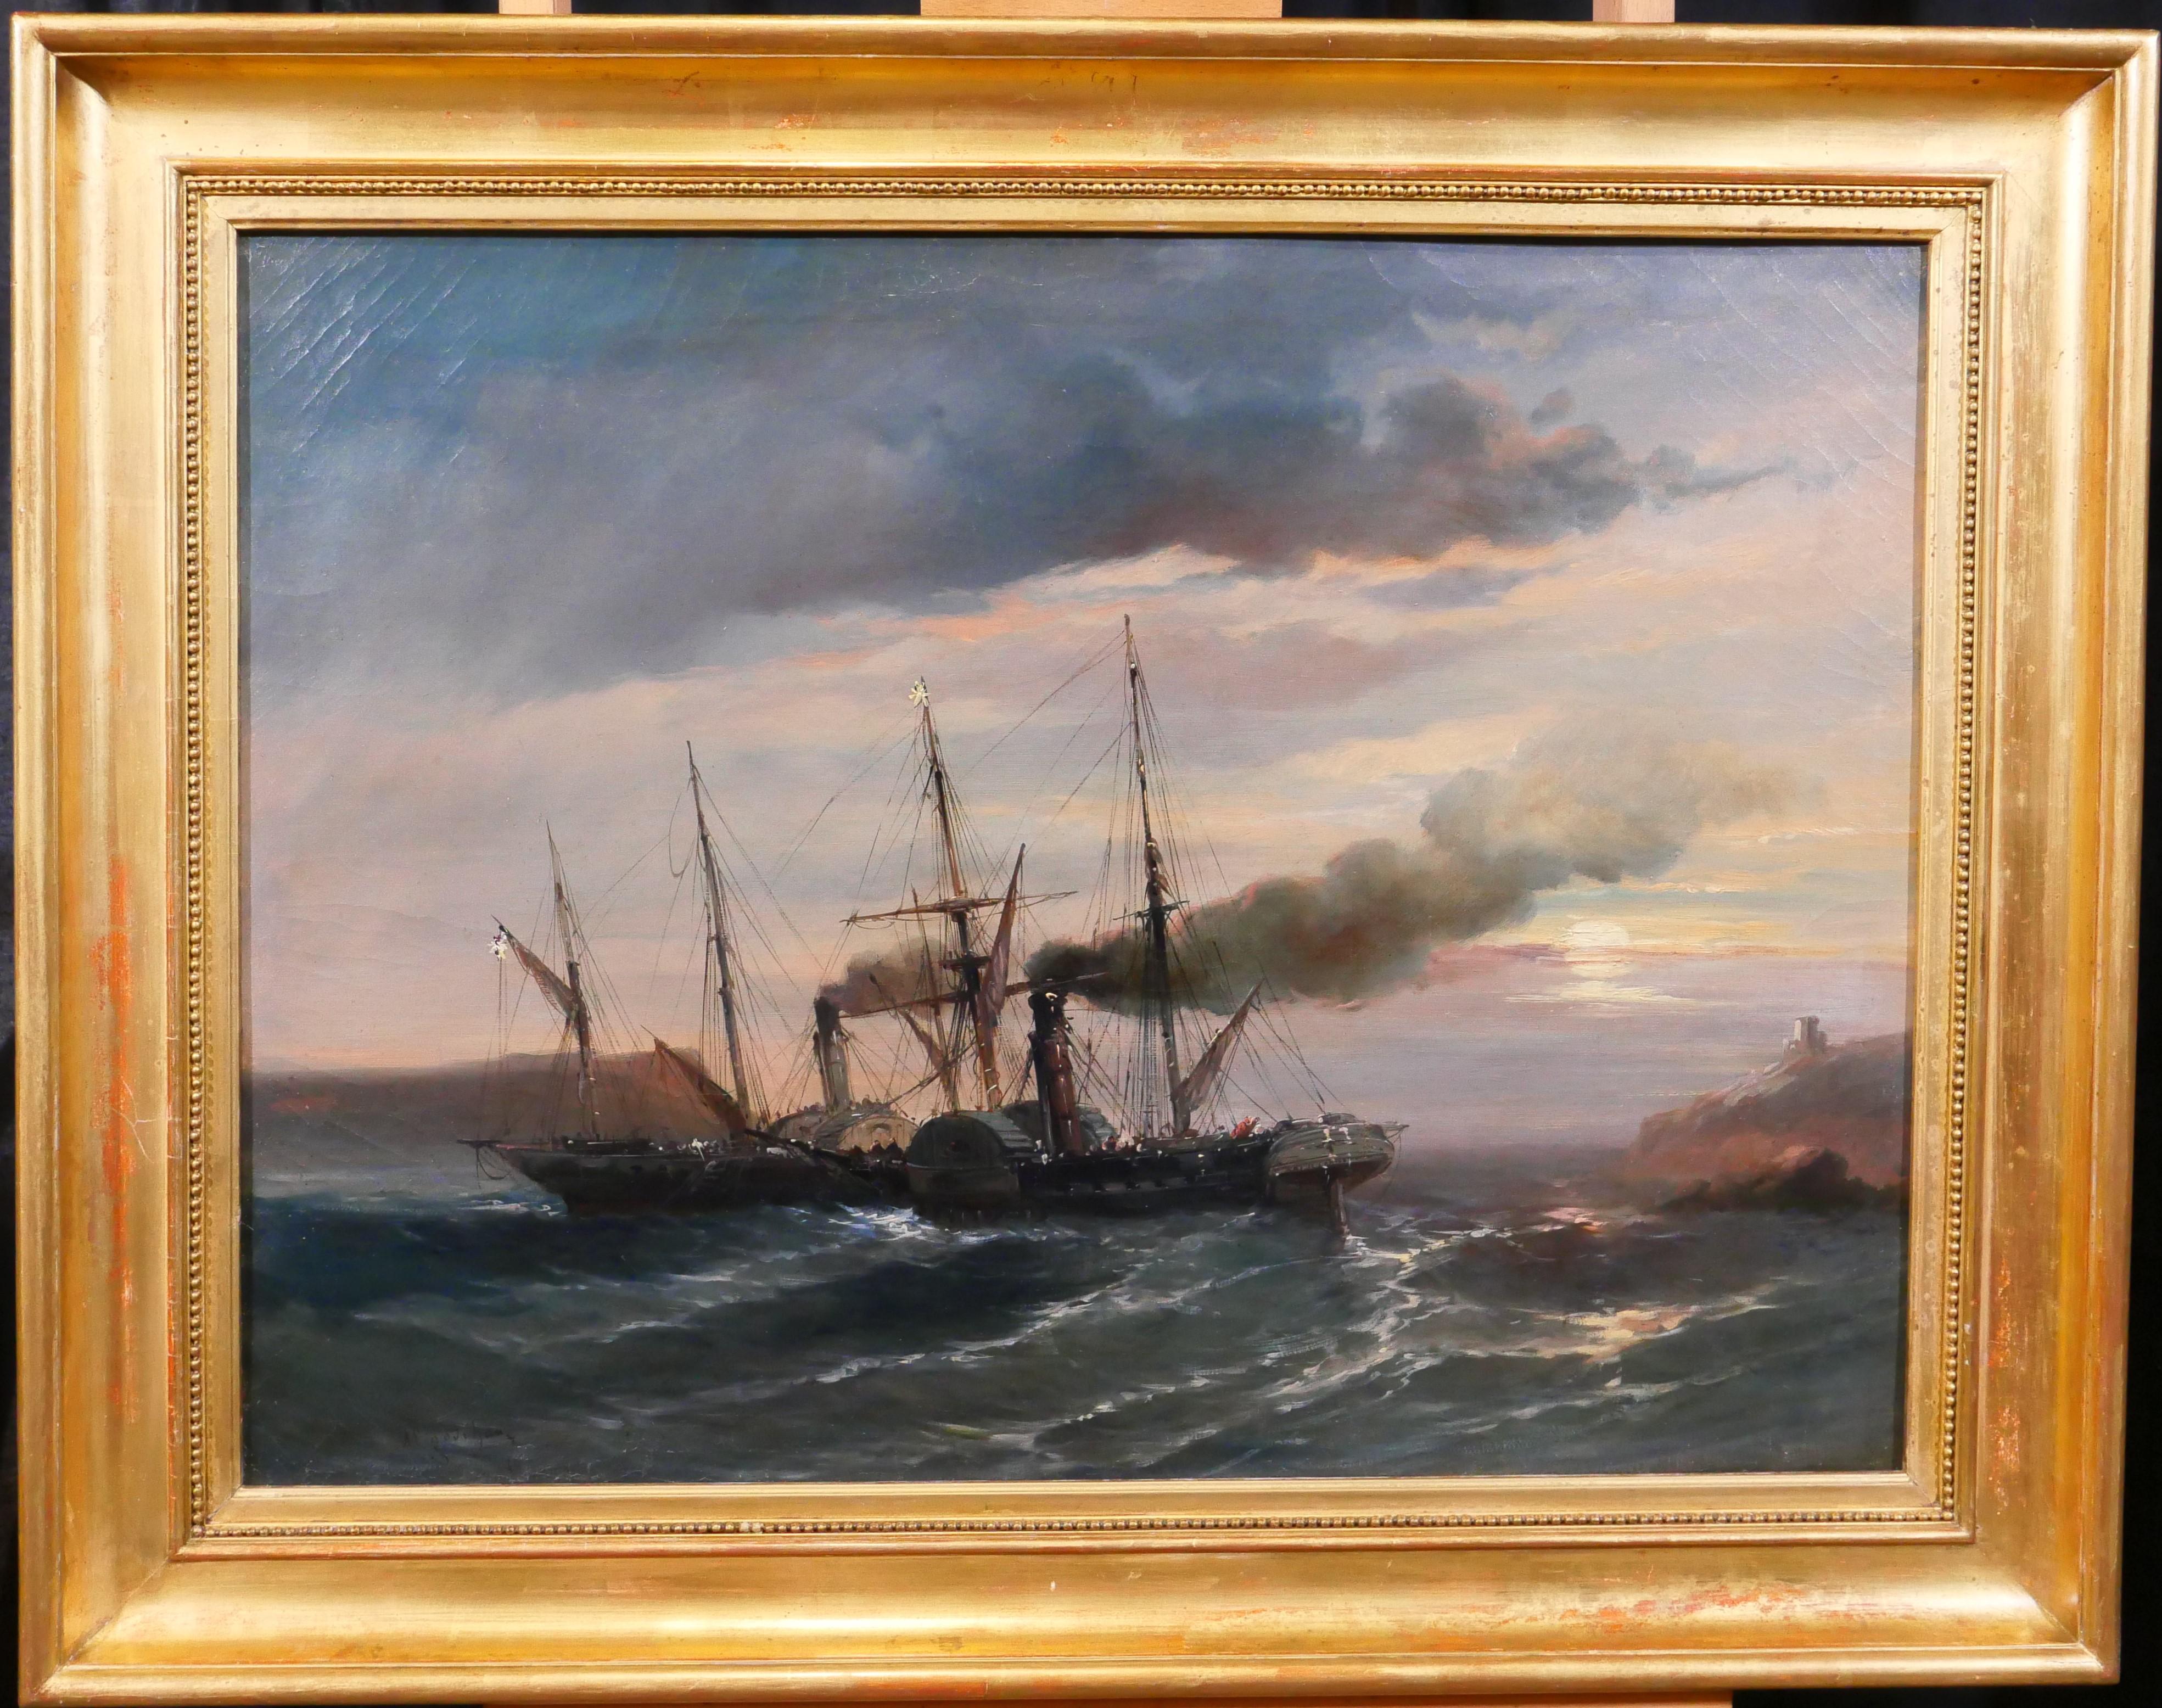 English boats at sunset - Painting by Alfred Godchaux